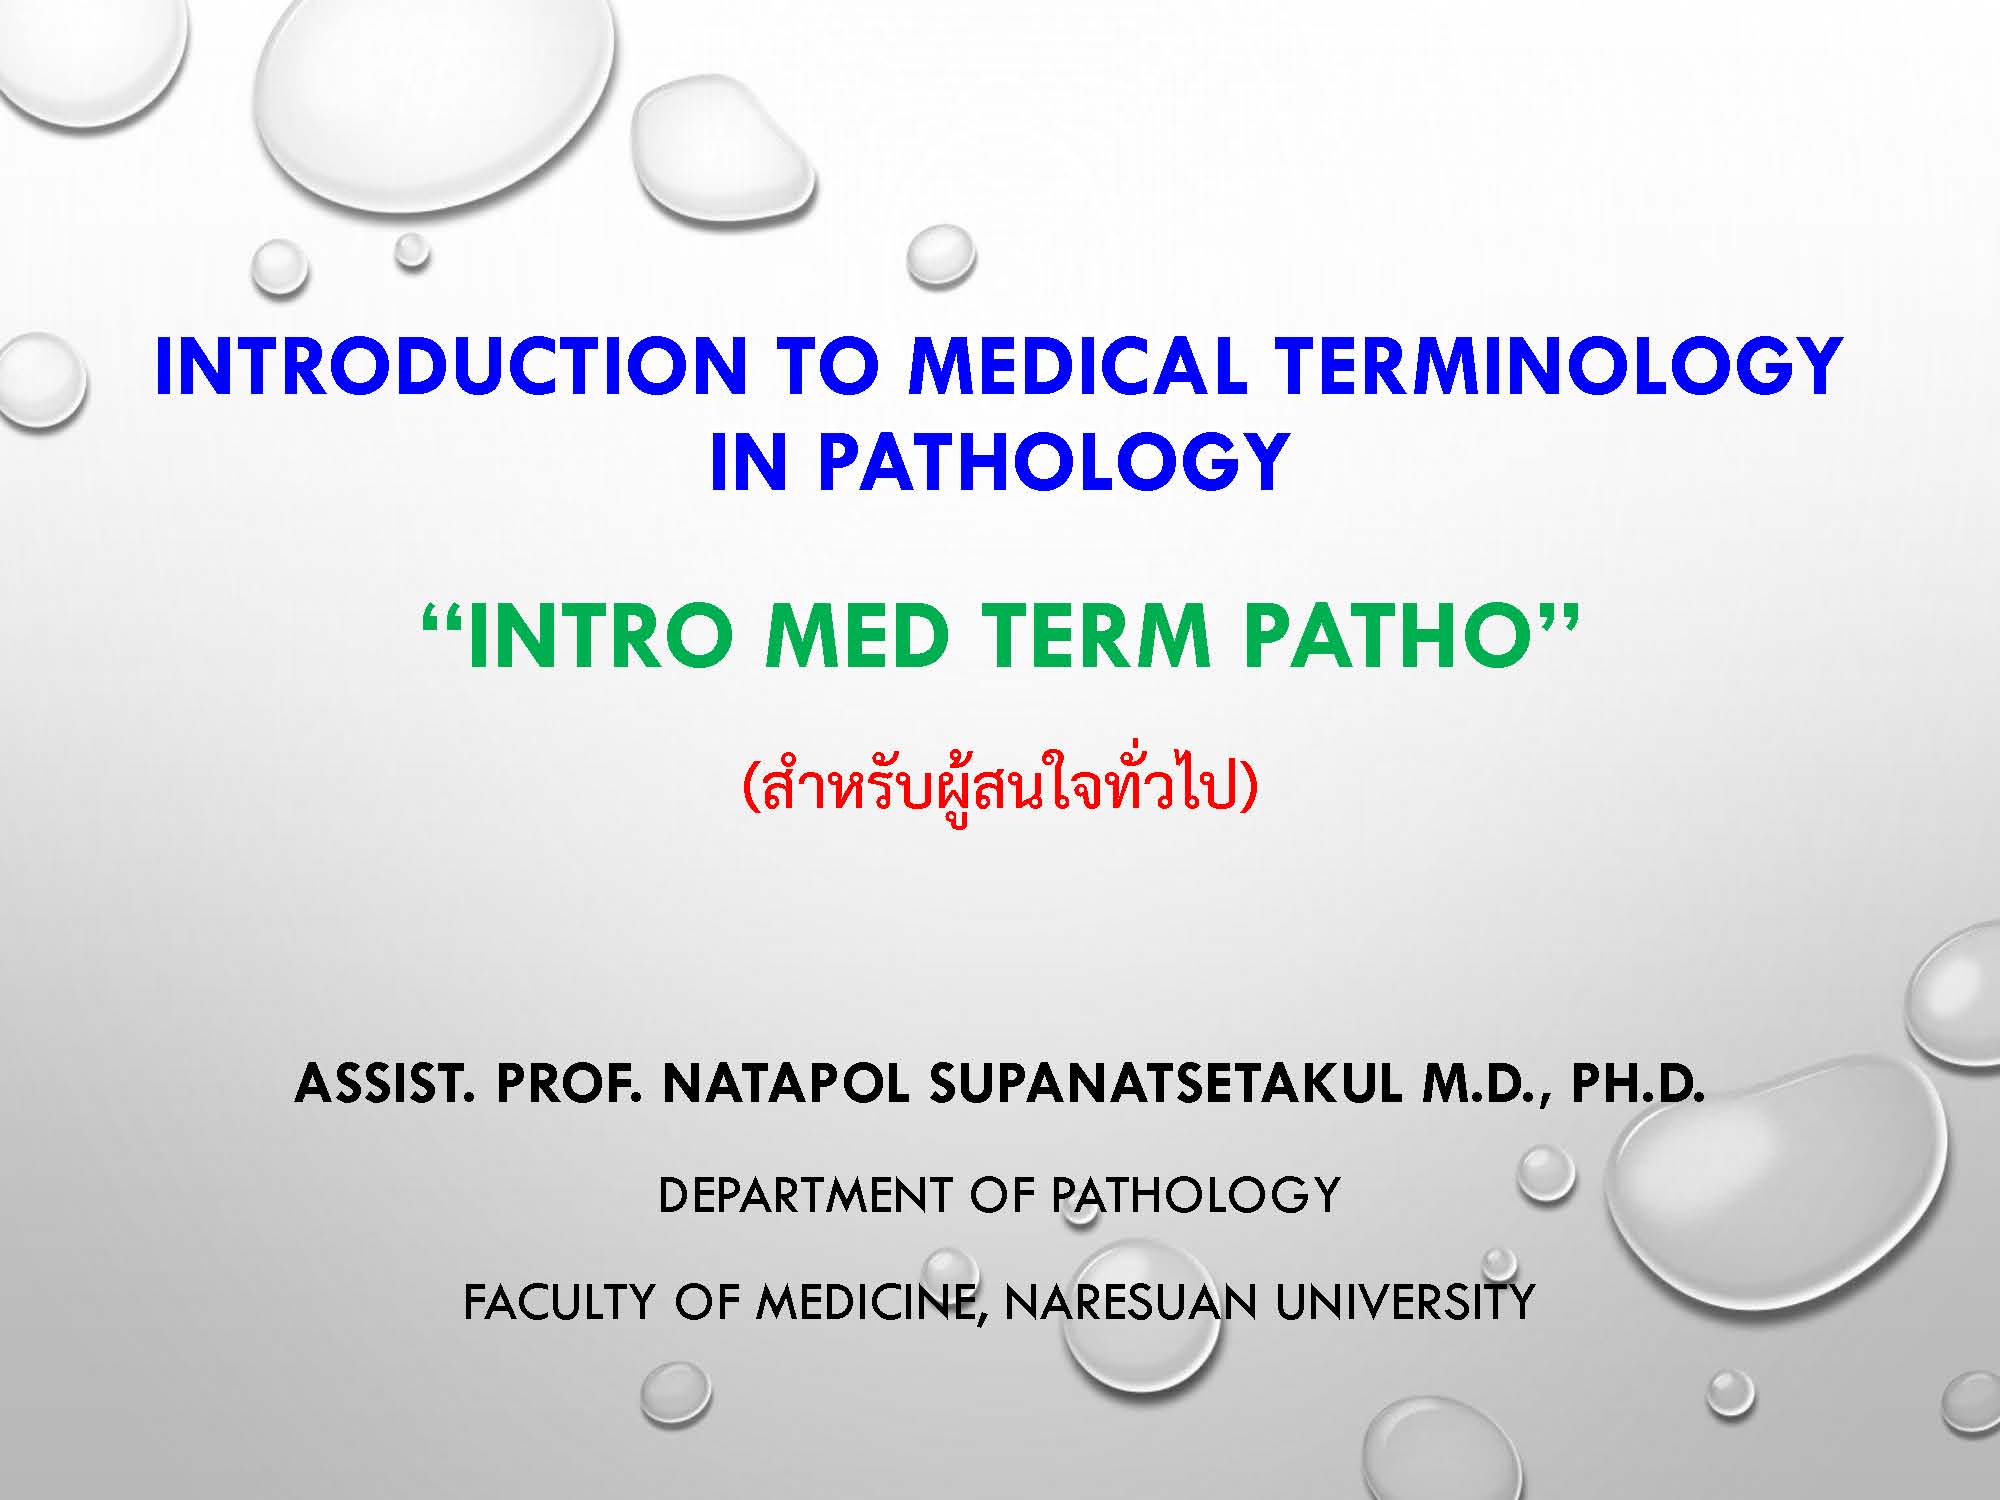 INTRODUCTION TO MEDICAL TERMINOLOGY IN PATHOLOGY 